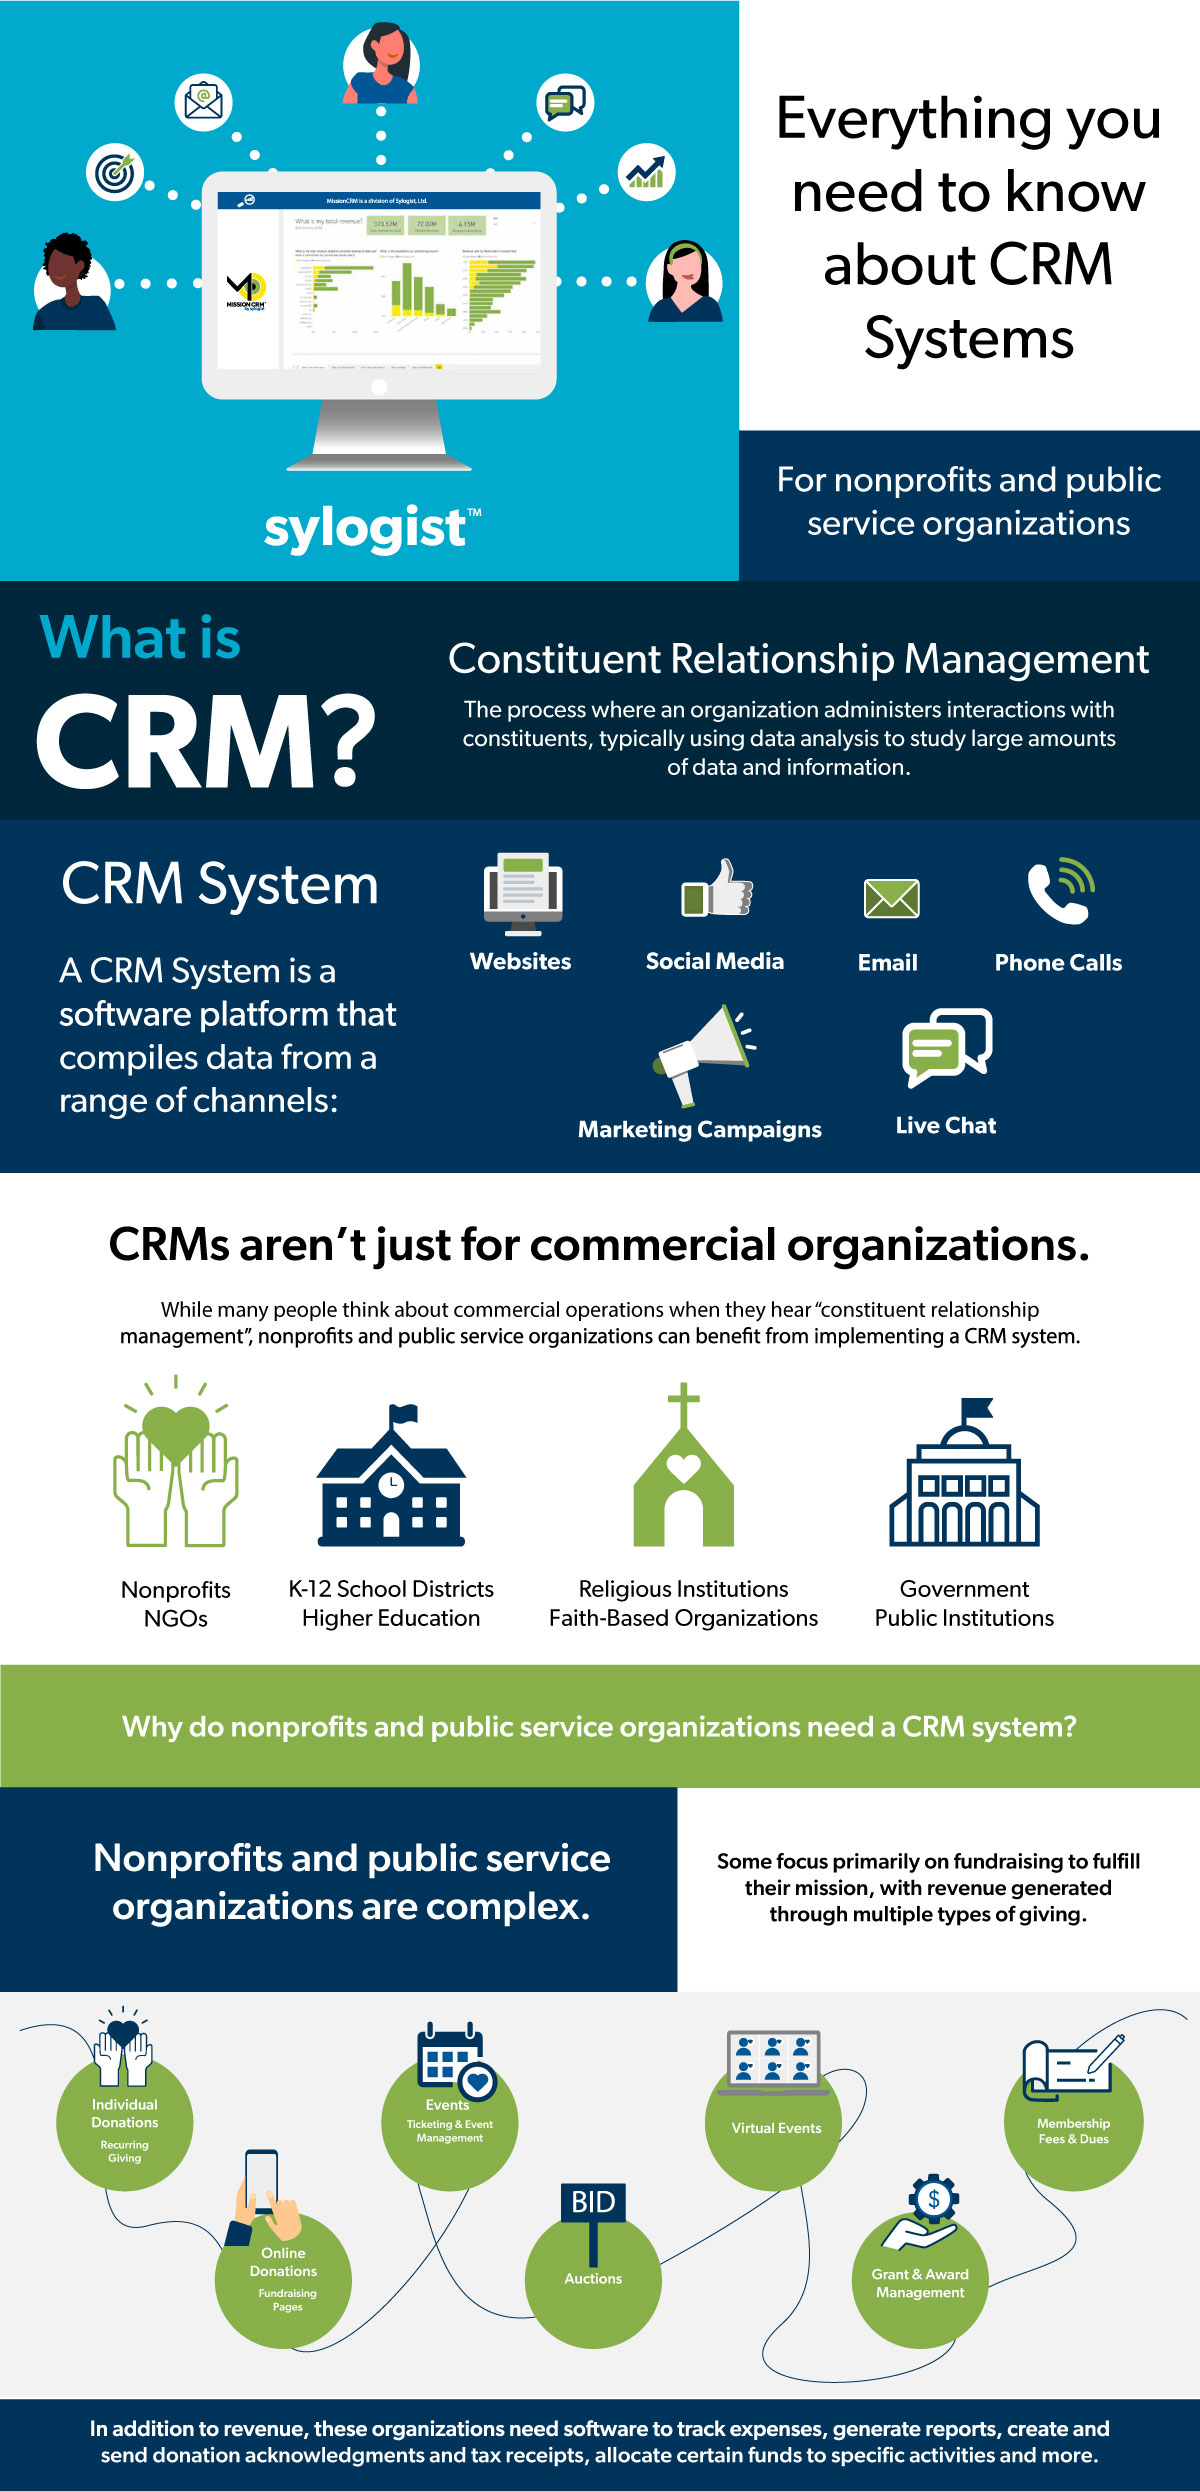 MISSION CRM Everything you need to know about CRM Systems [Infographic]